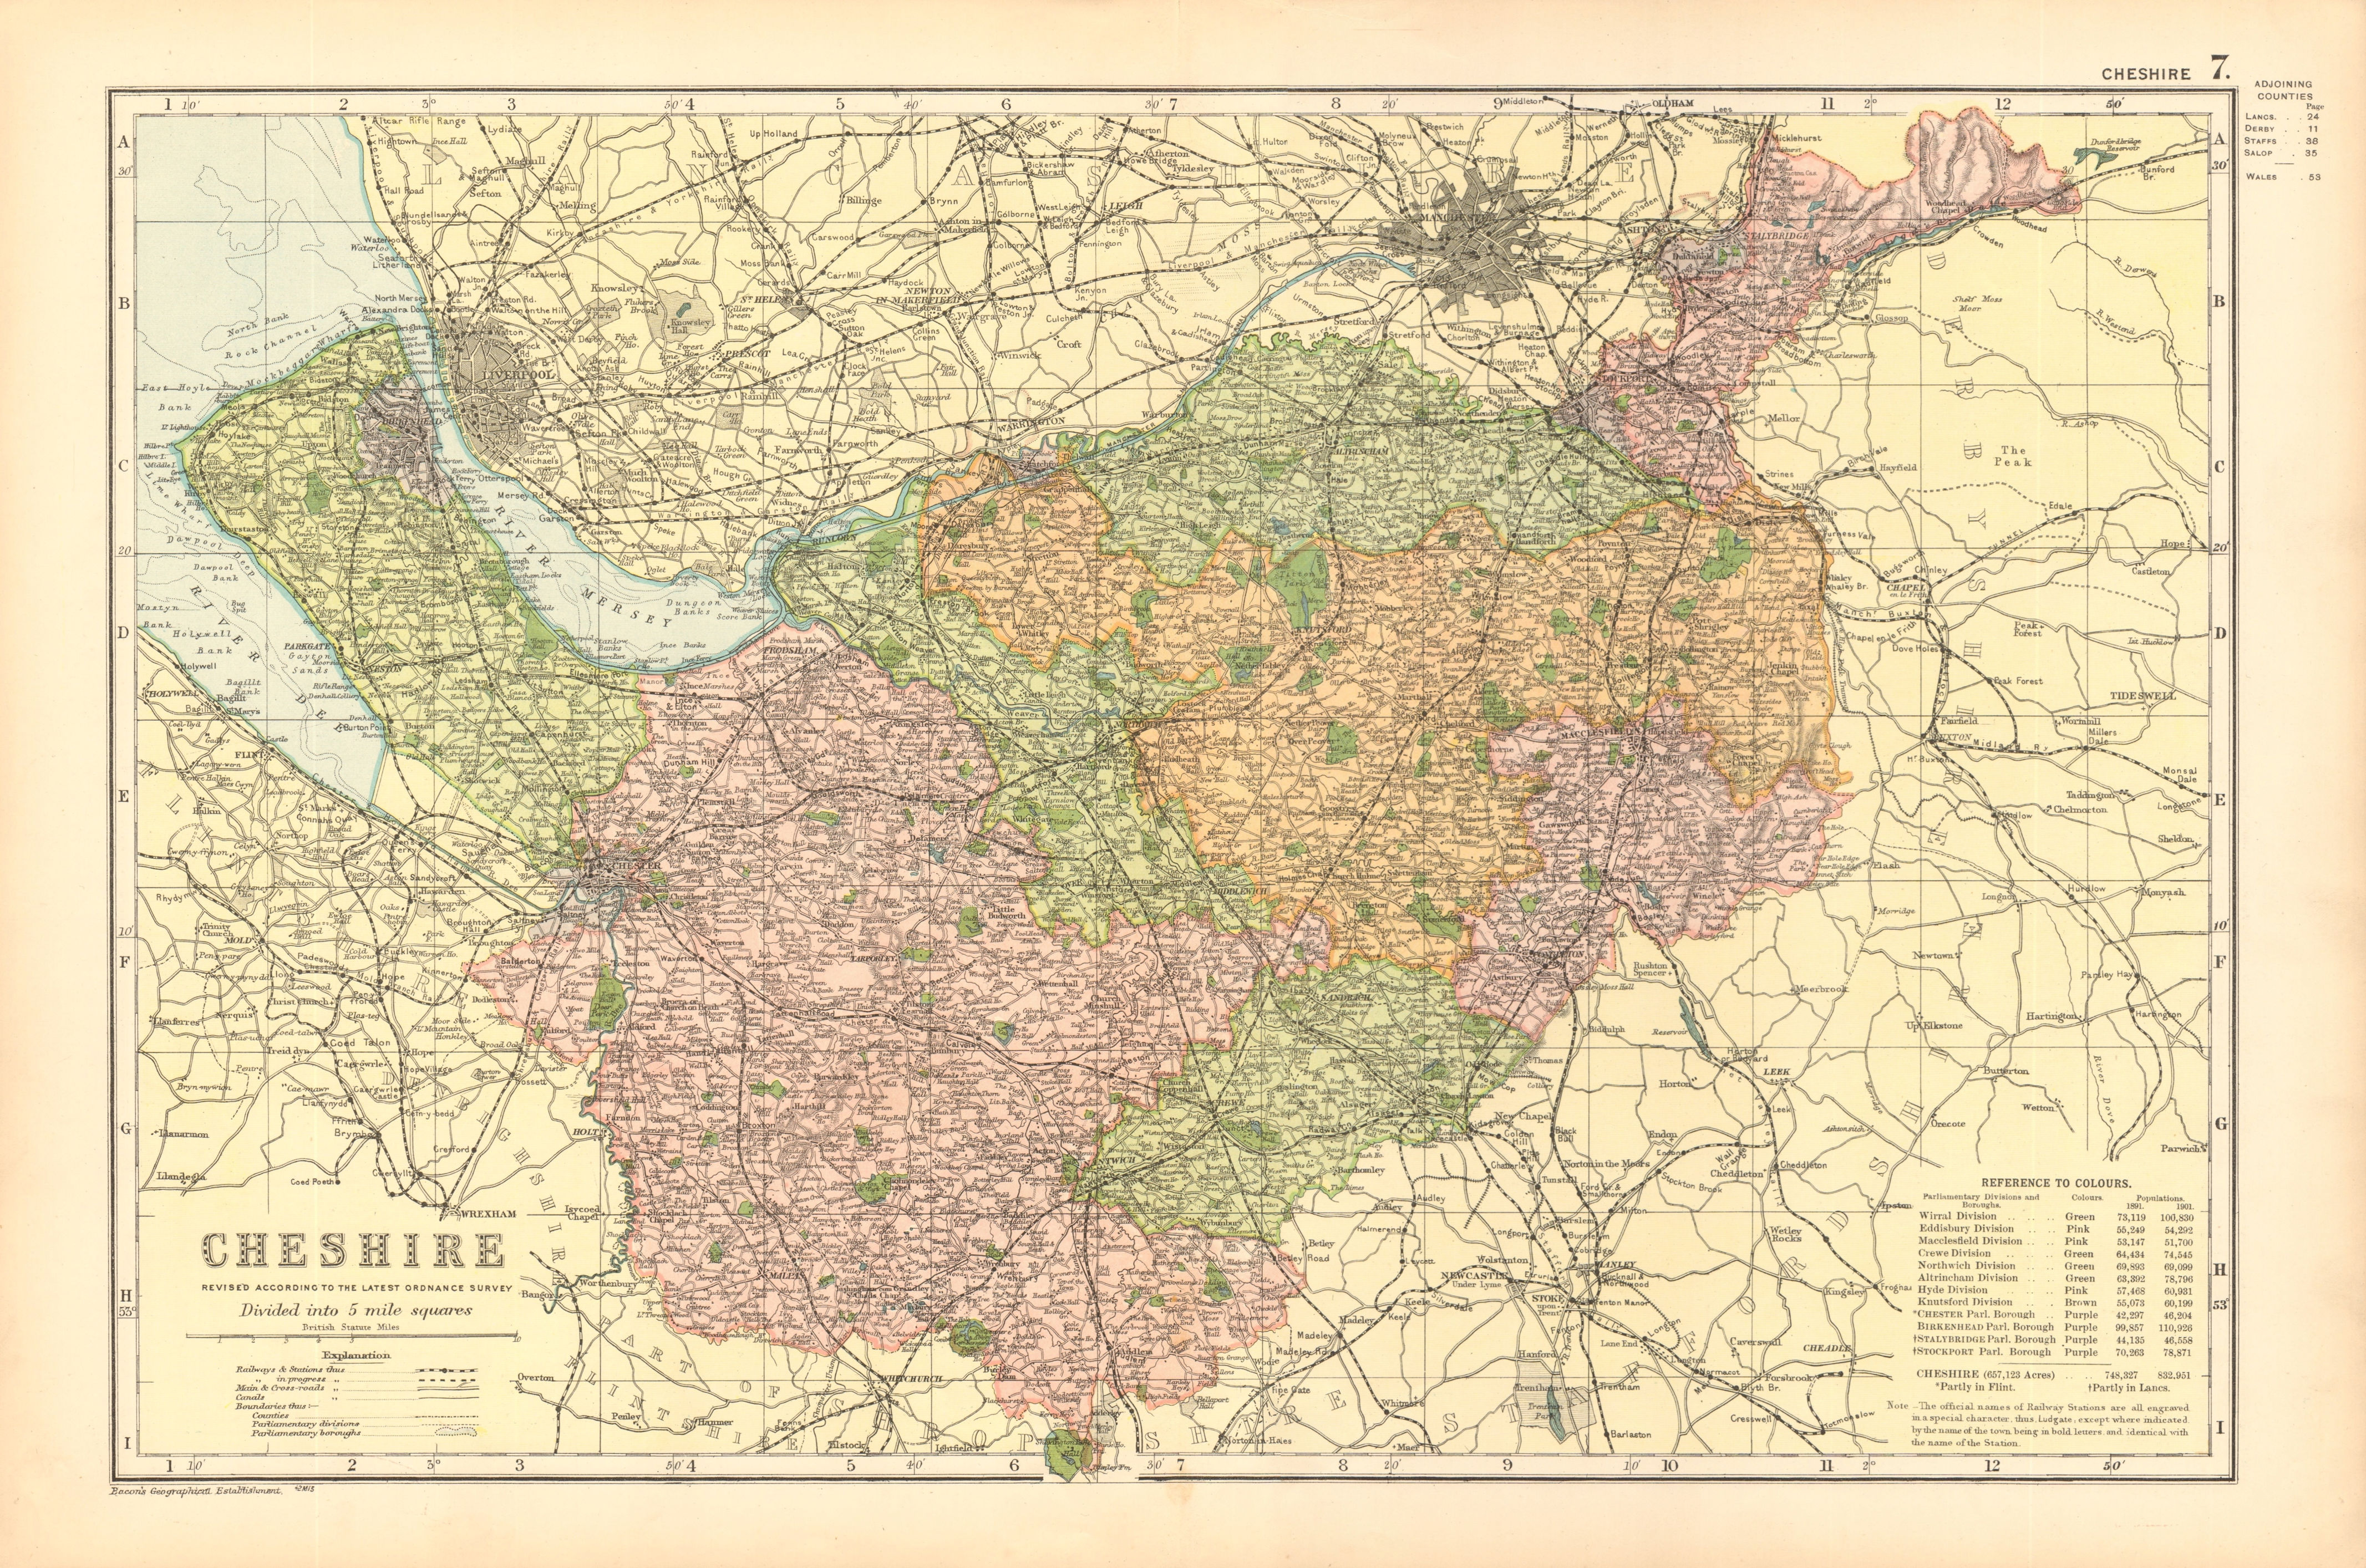 Associate Product CHESHIRE. Showing Parliamentary divisions, boroughs & parks. BACON 1904 map